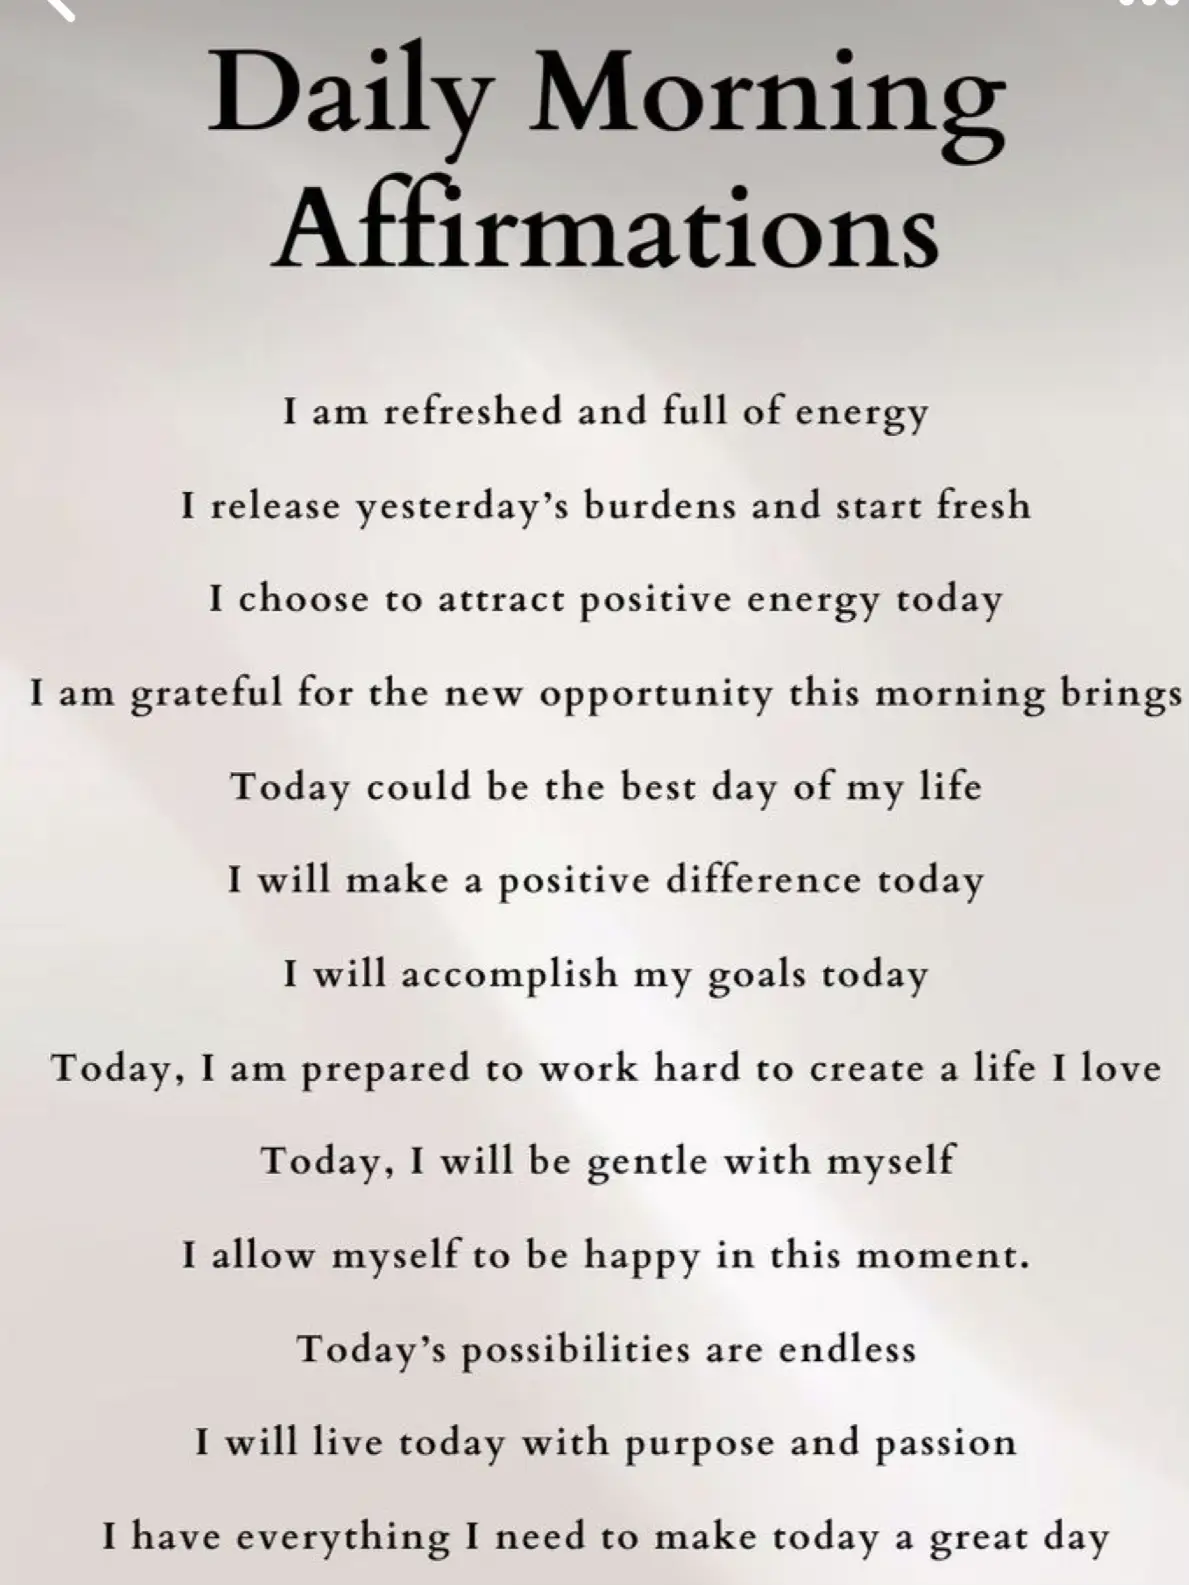 99 Positive Morning Affirmations You Can Use Daily - The Good Trade